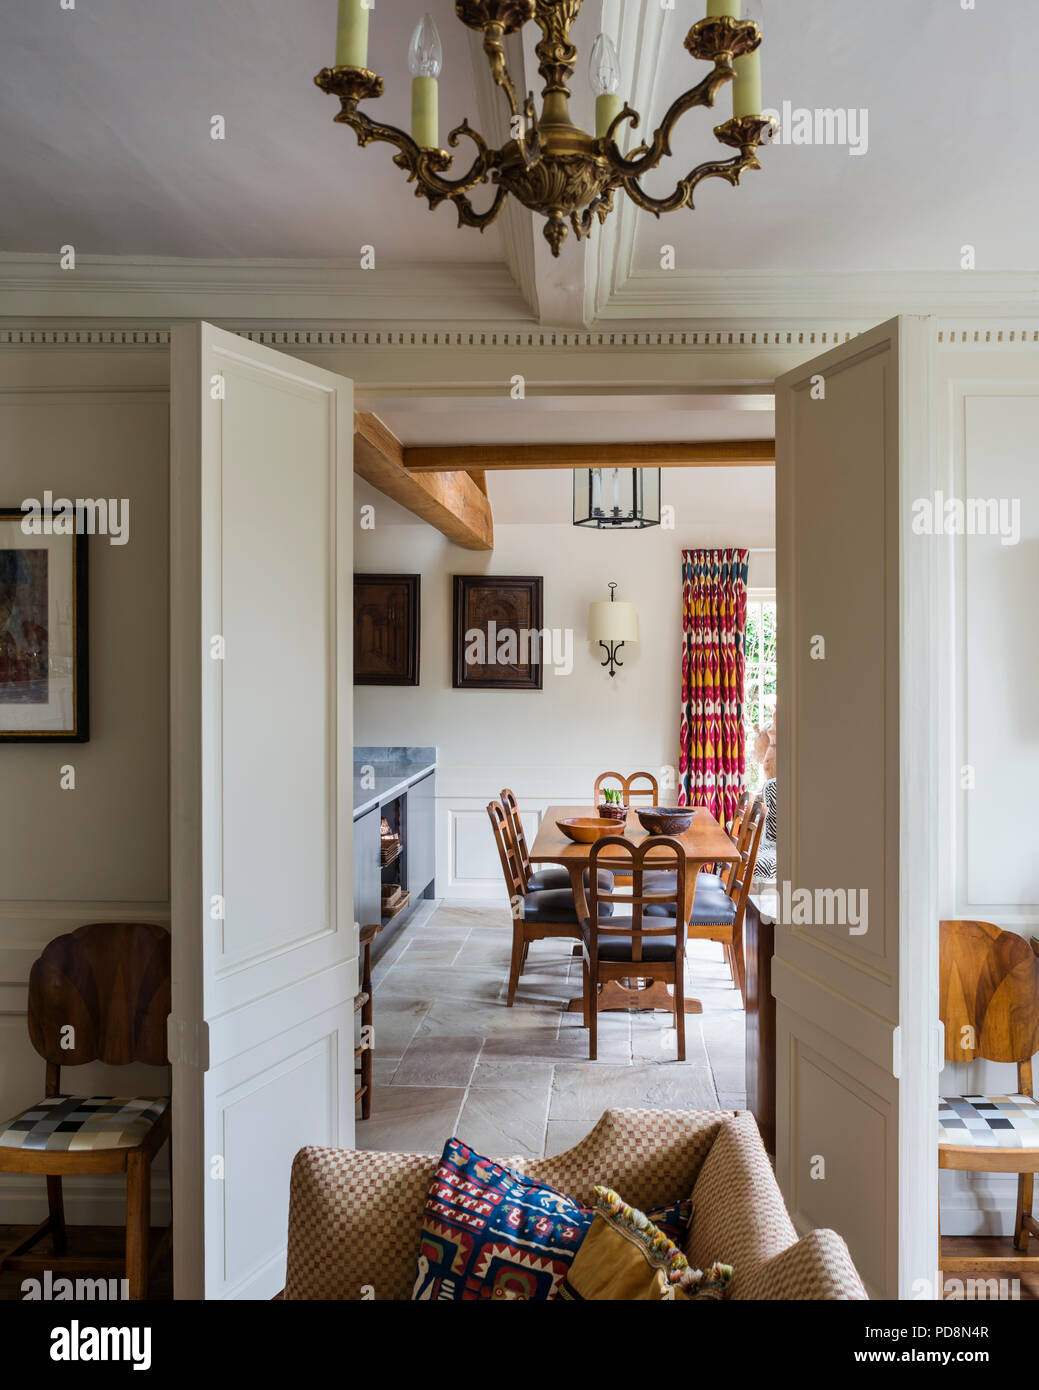 View through double doorway to vintage dining table and chairs Stock Photo